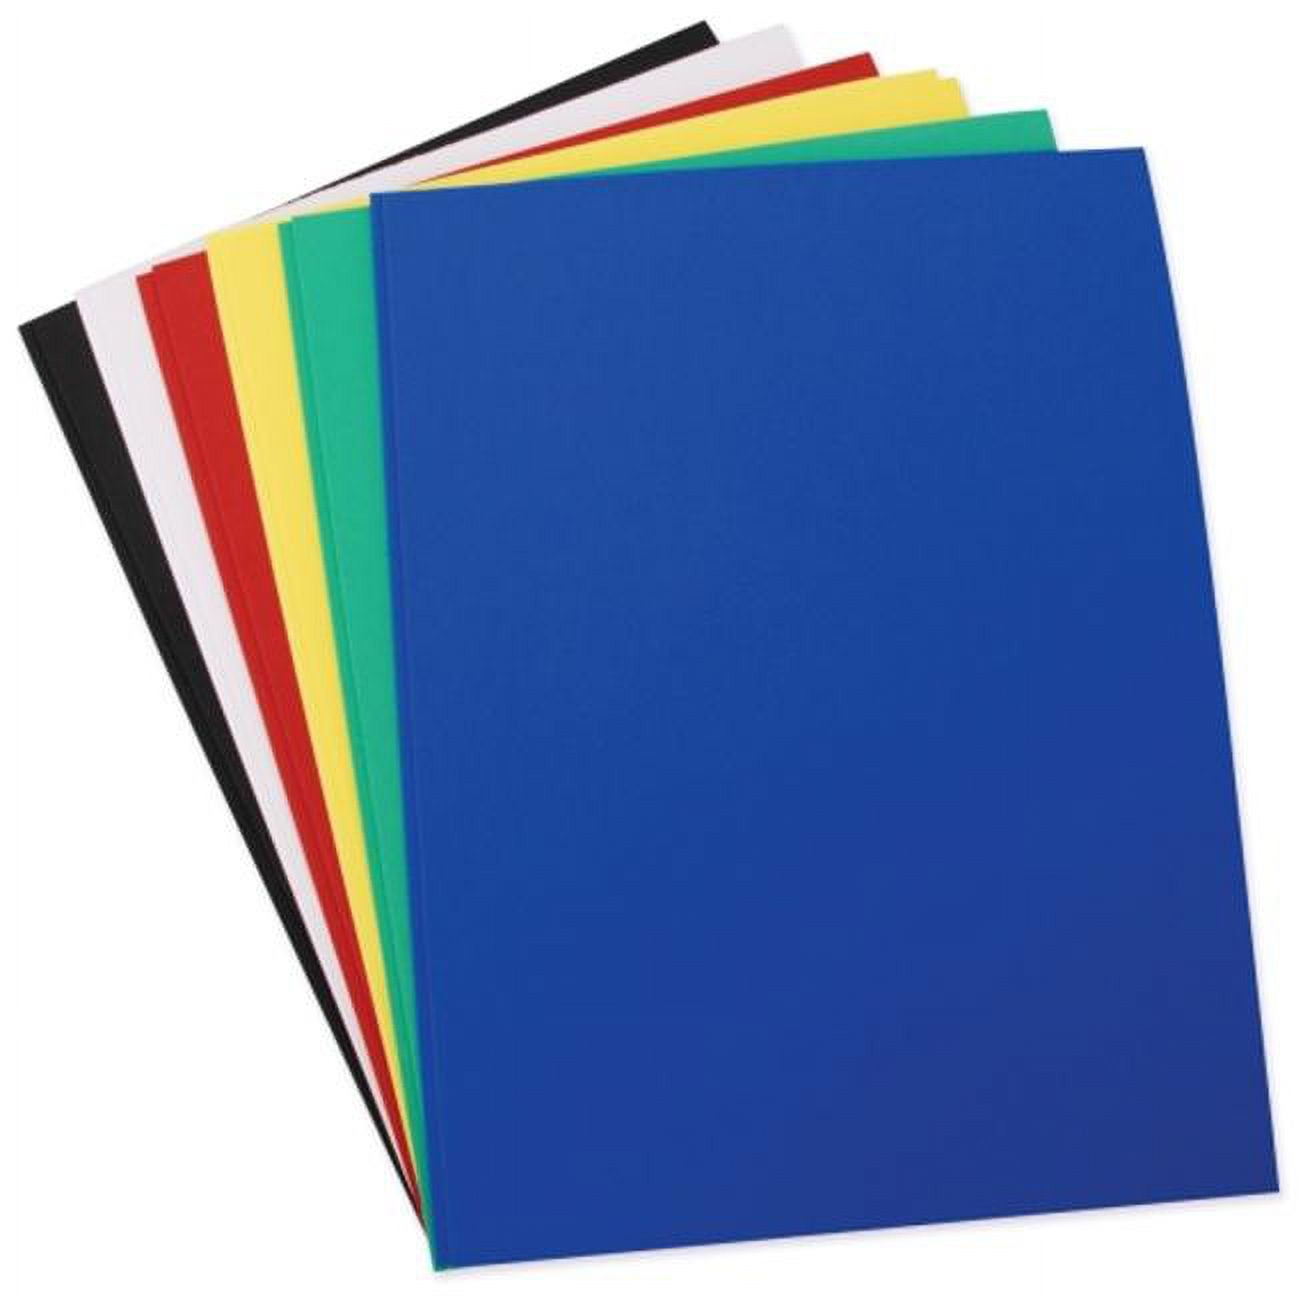 Creative Hands Foam Craft Sheets (57 Sheets) 8 1/2” x 5 3/4” Multicolored  New